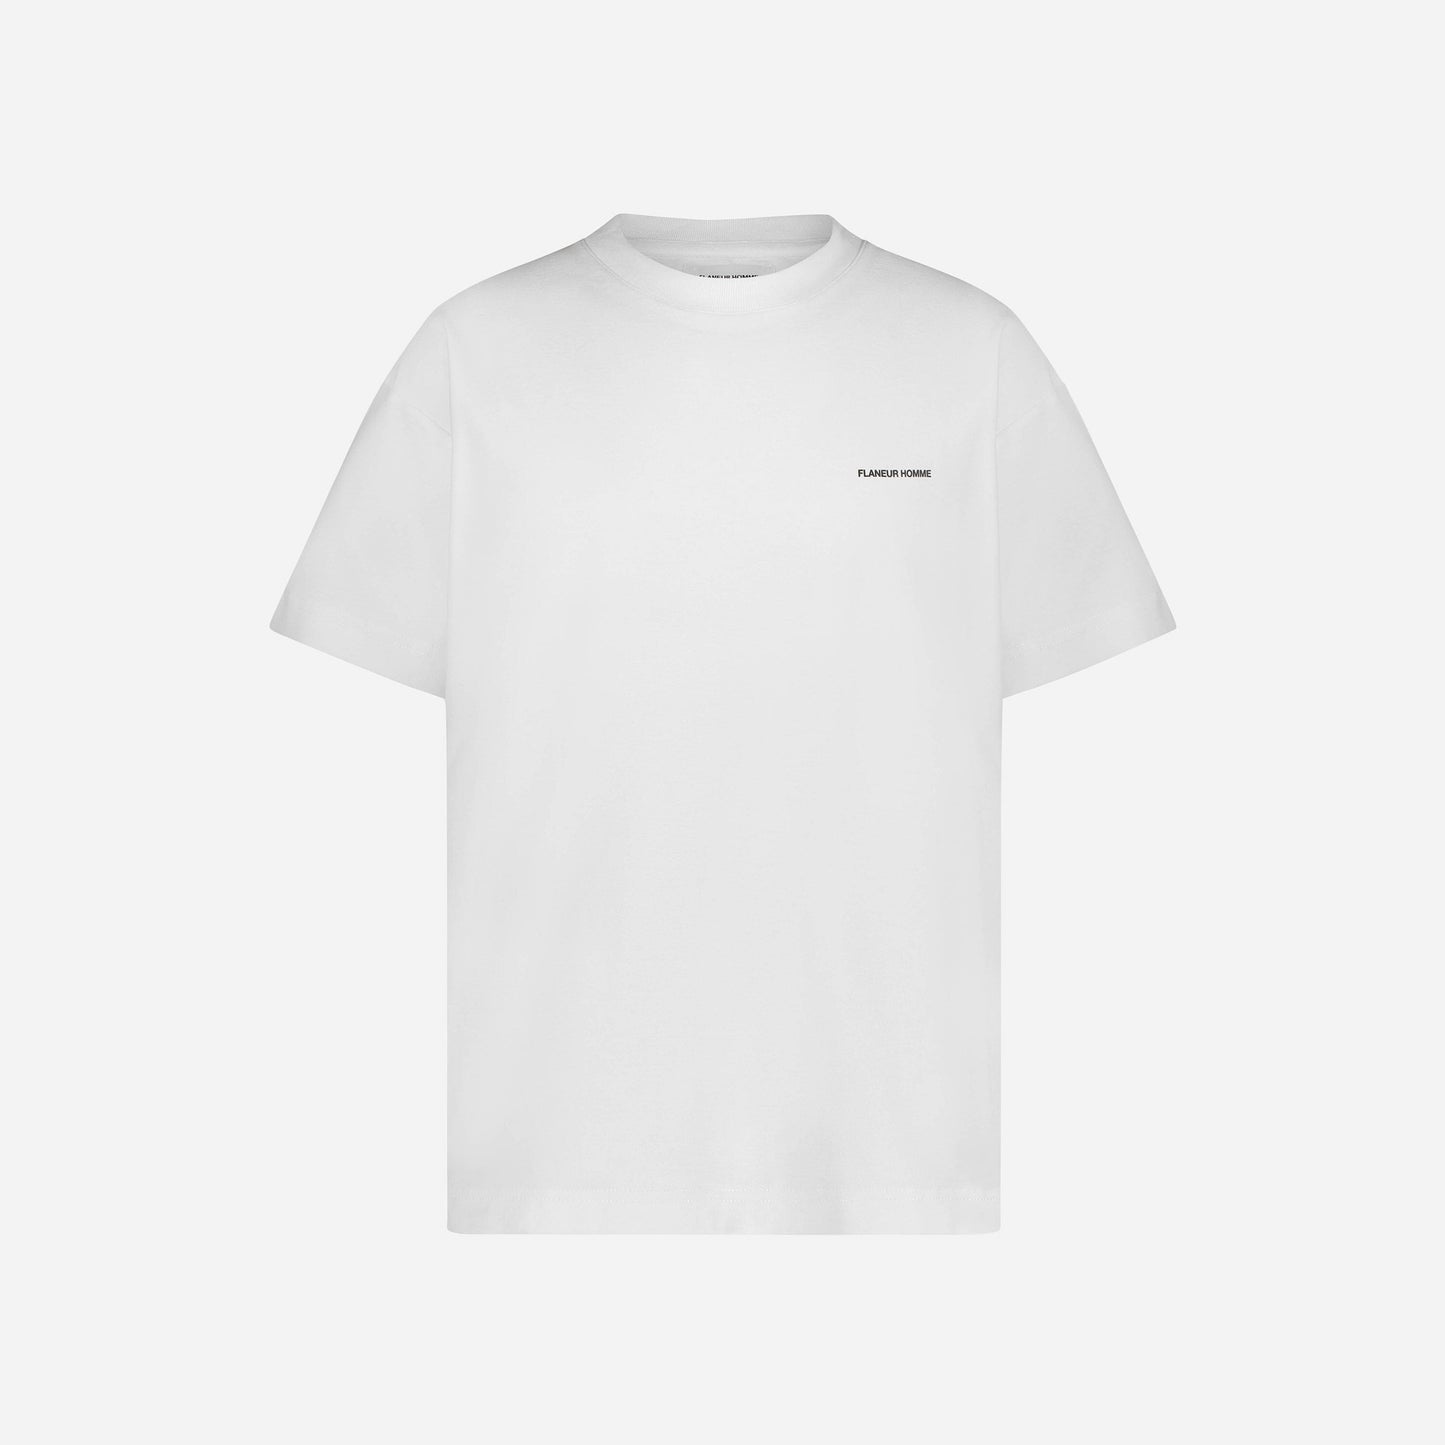 Essential T-Shirt in White